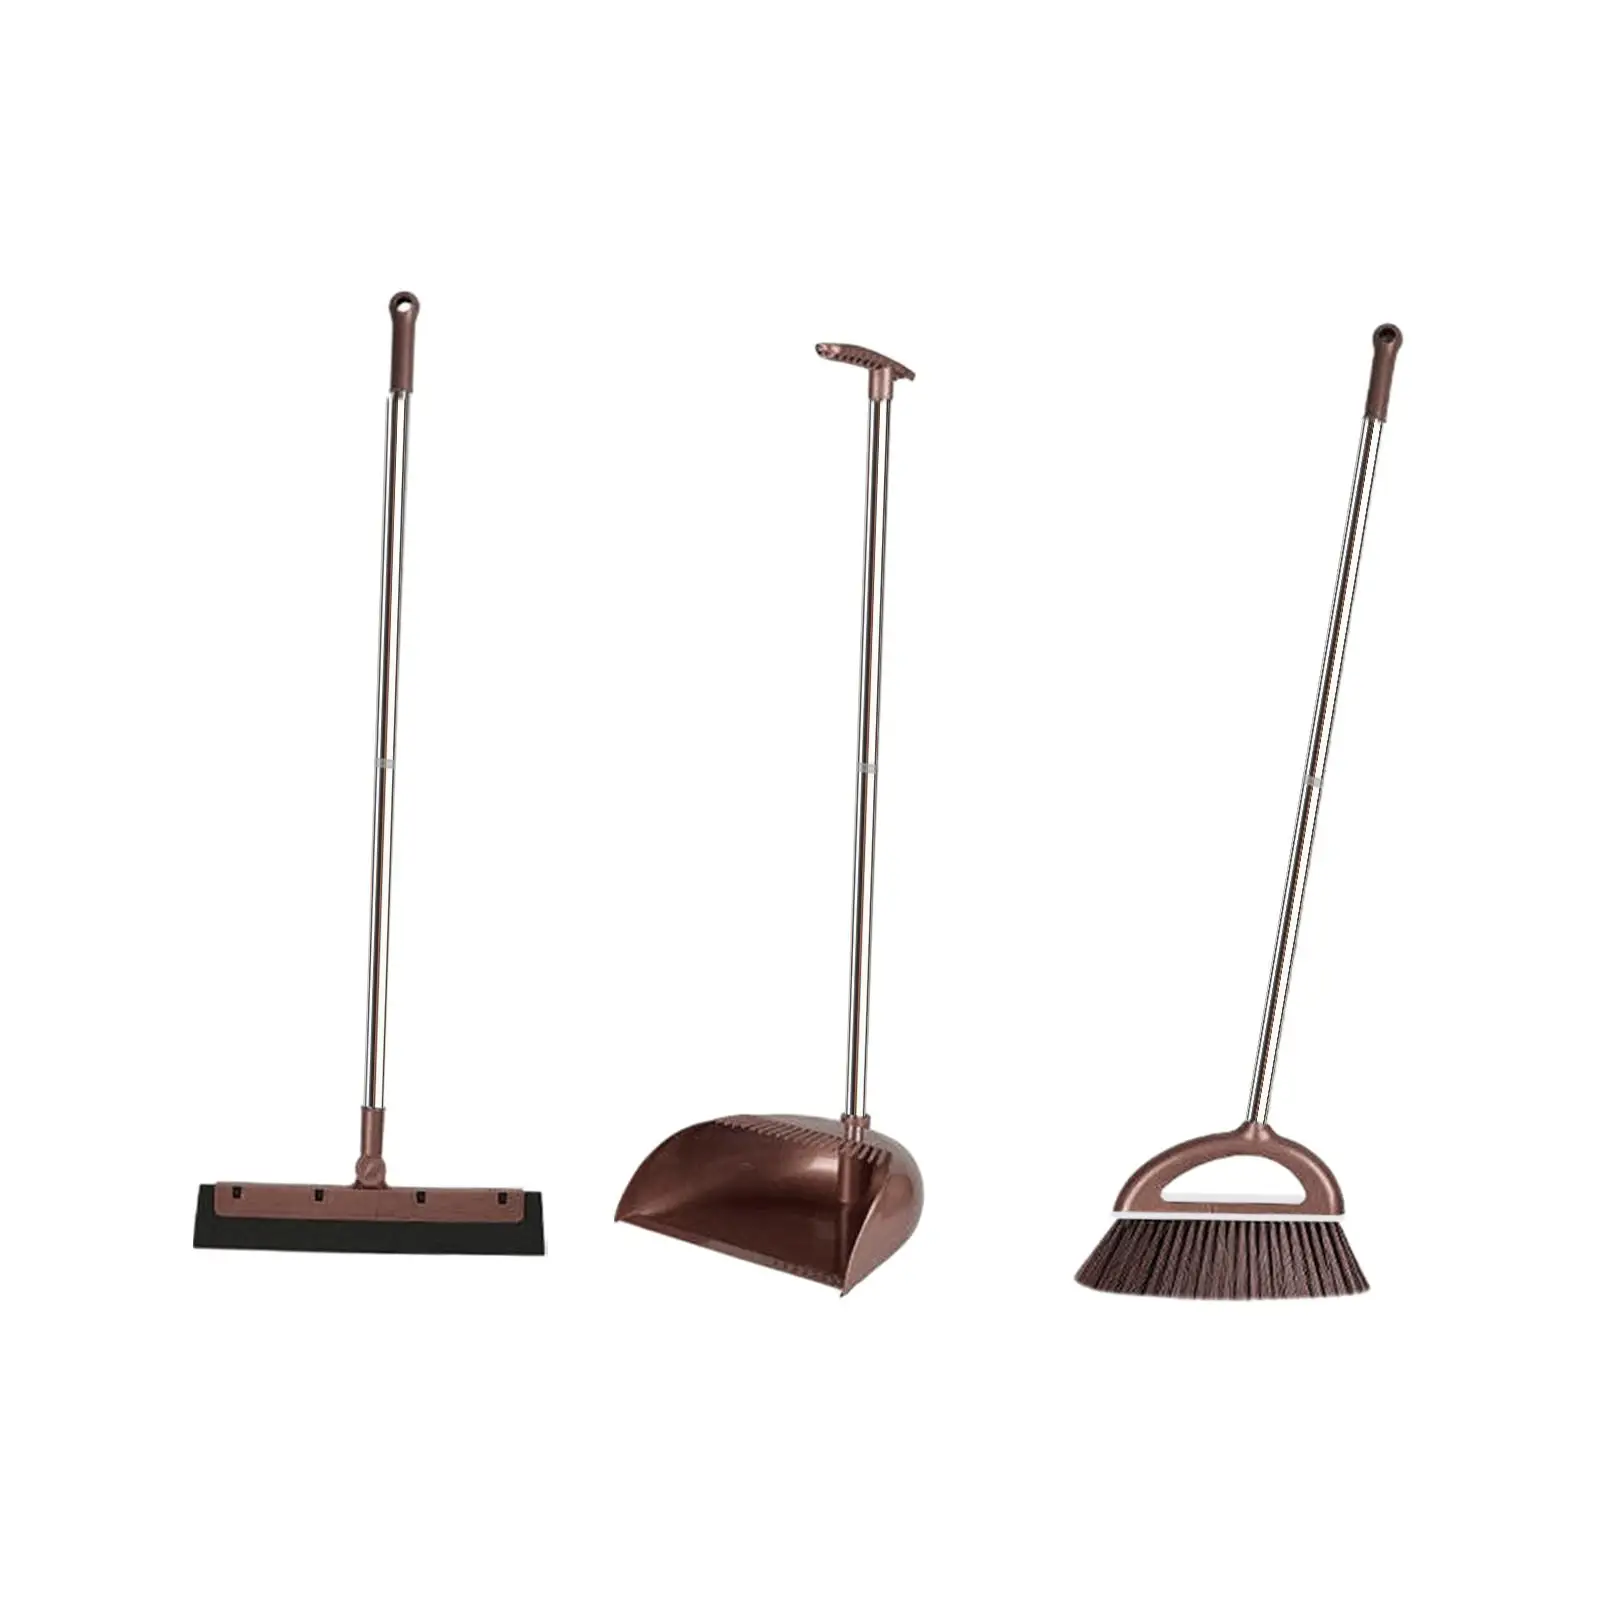 3x Dustpan Broom Set Floor Wiper Household Cleaning Long Handle Cleaning Set for Lobby Household Kitchen Indoor Cleaning